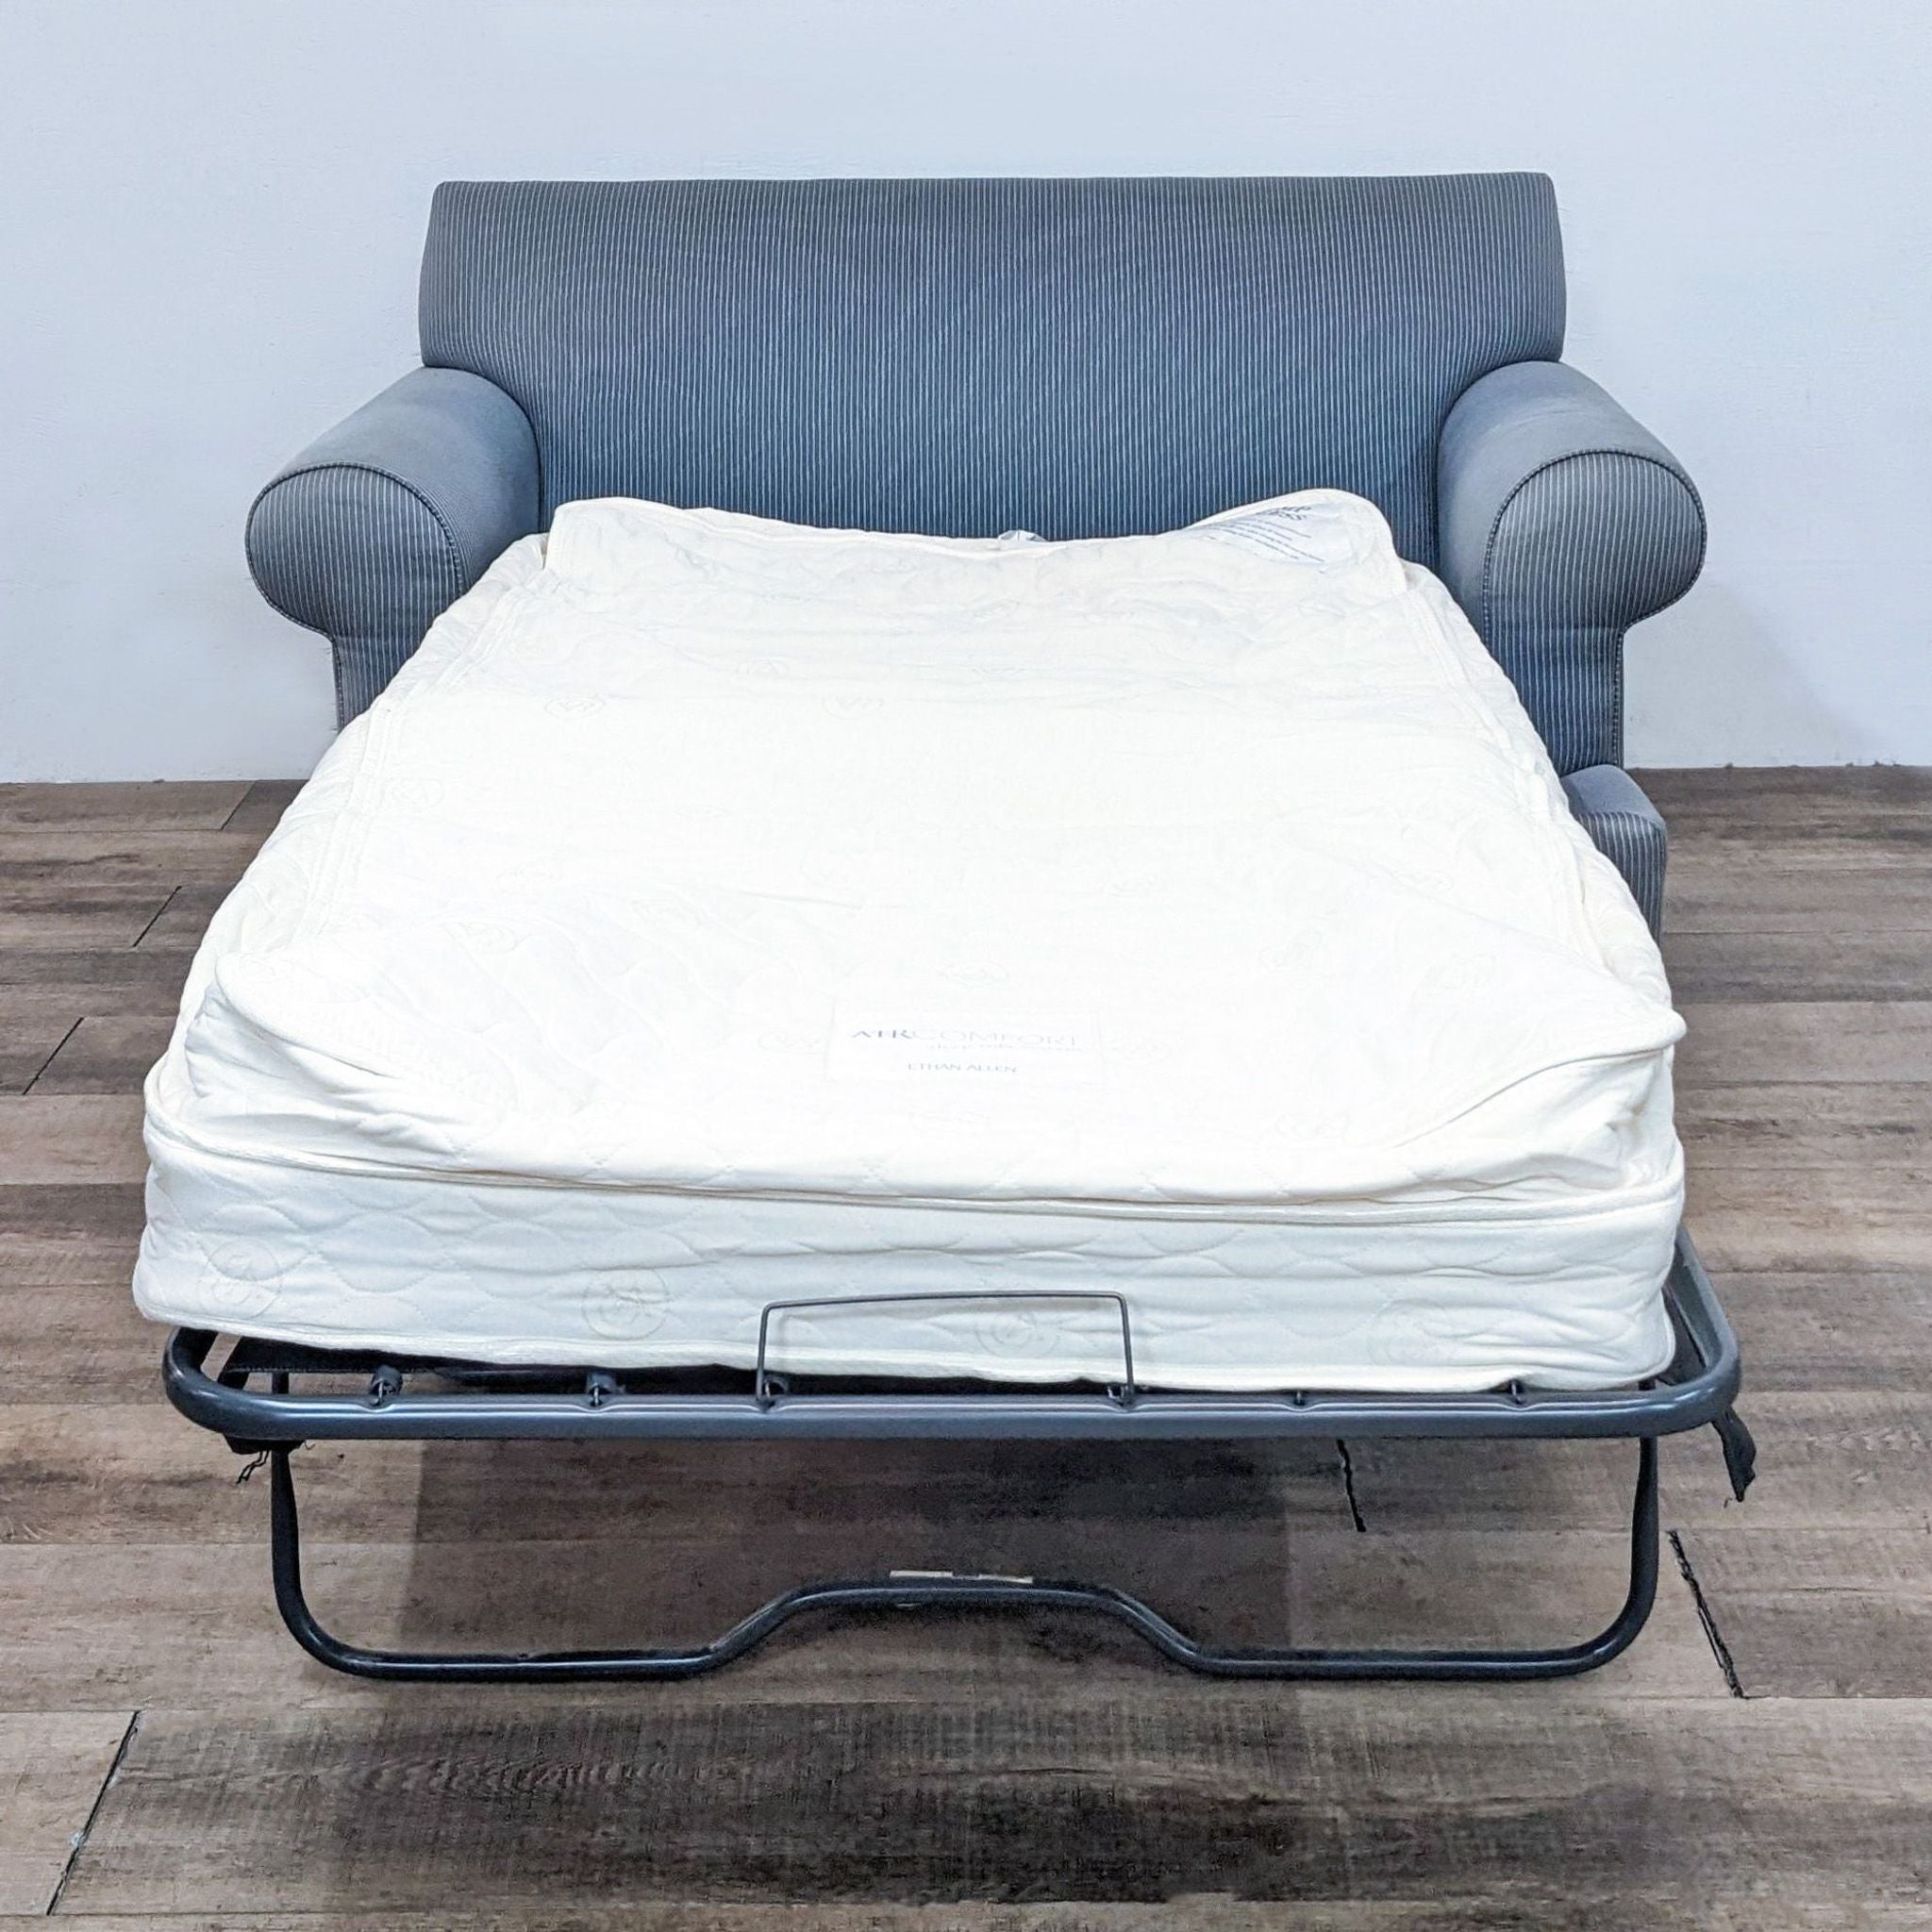 Inflatable twin mattress extended from an Ethan Allen sleeper loveseat sofa with a label showcasing the Air Comfort Sleep System.